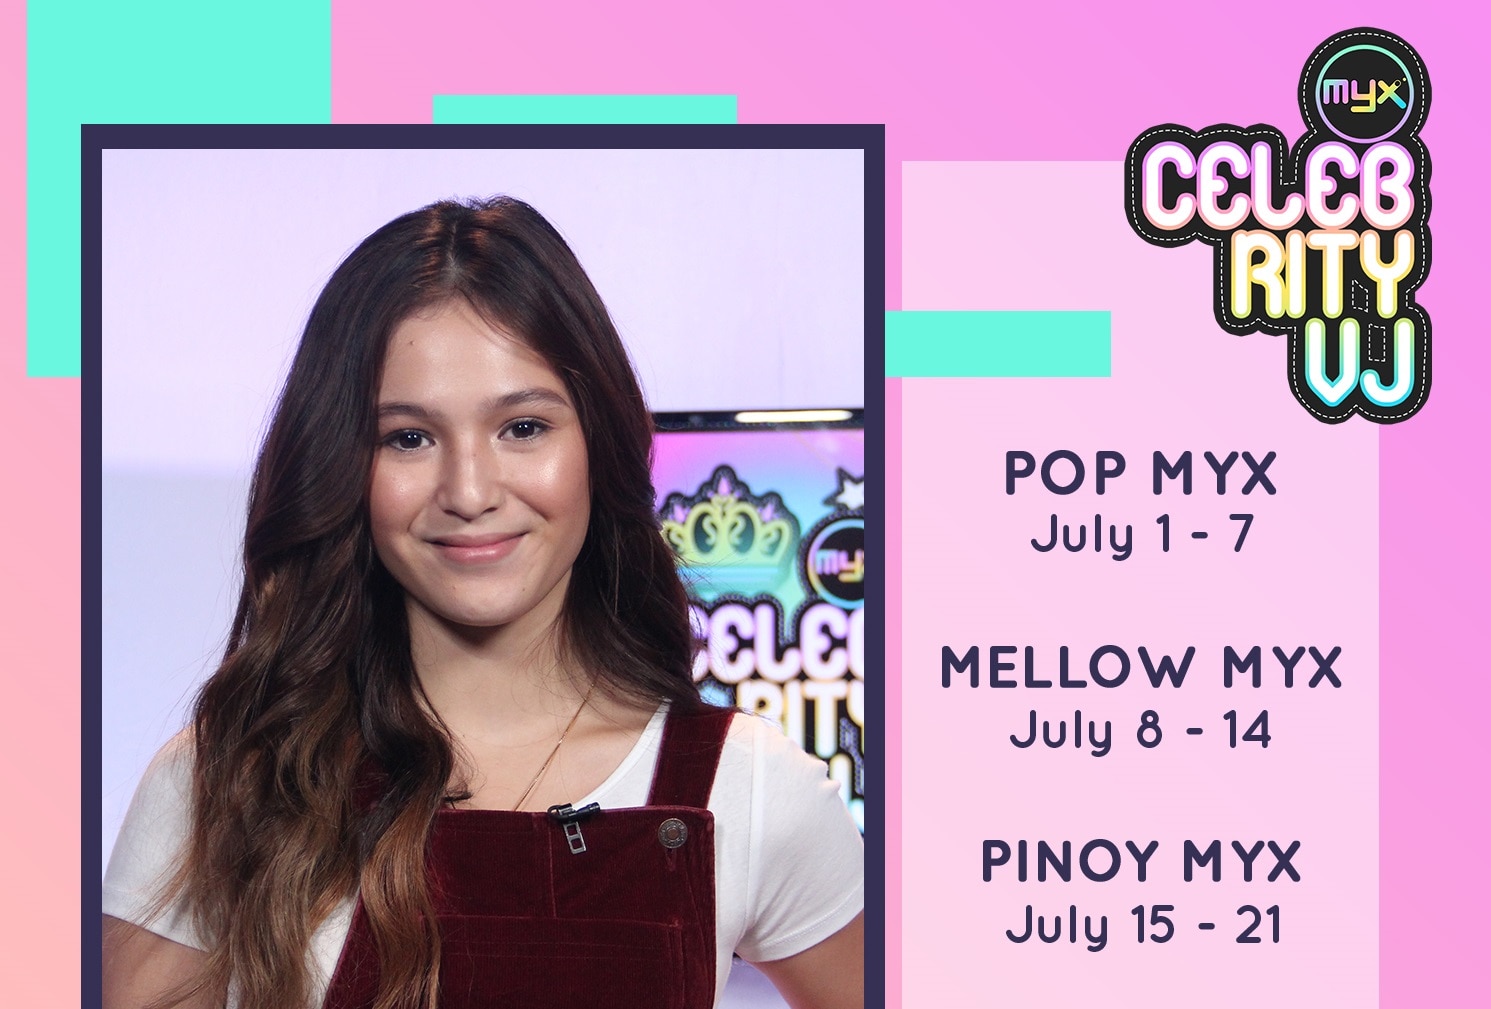 Barbie Imperial is MYX’s muse for July